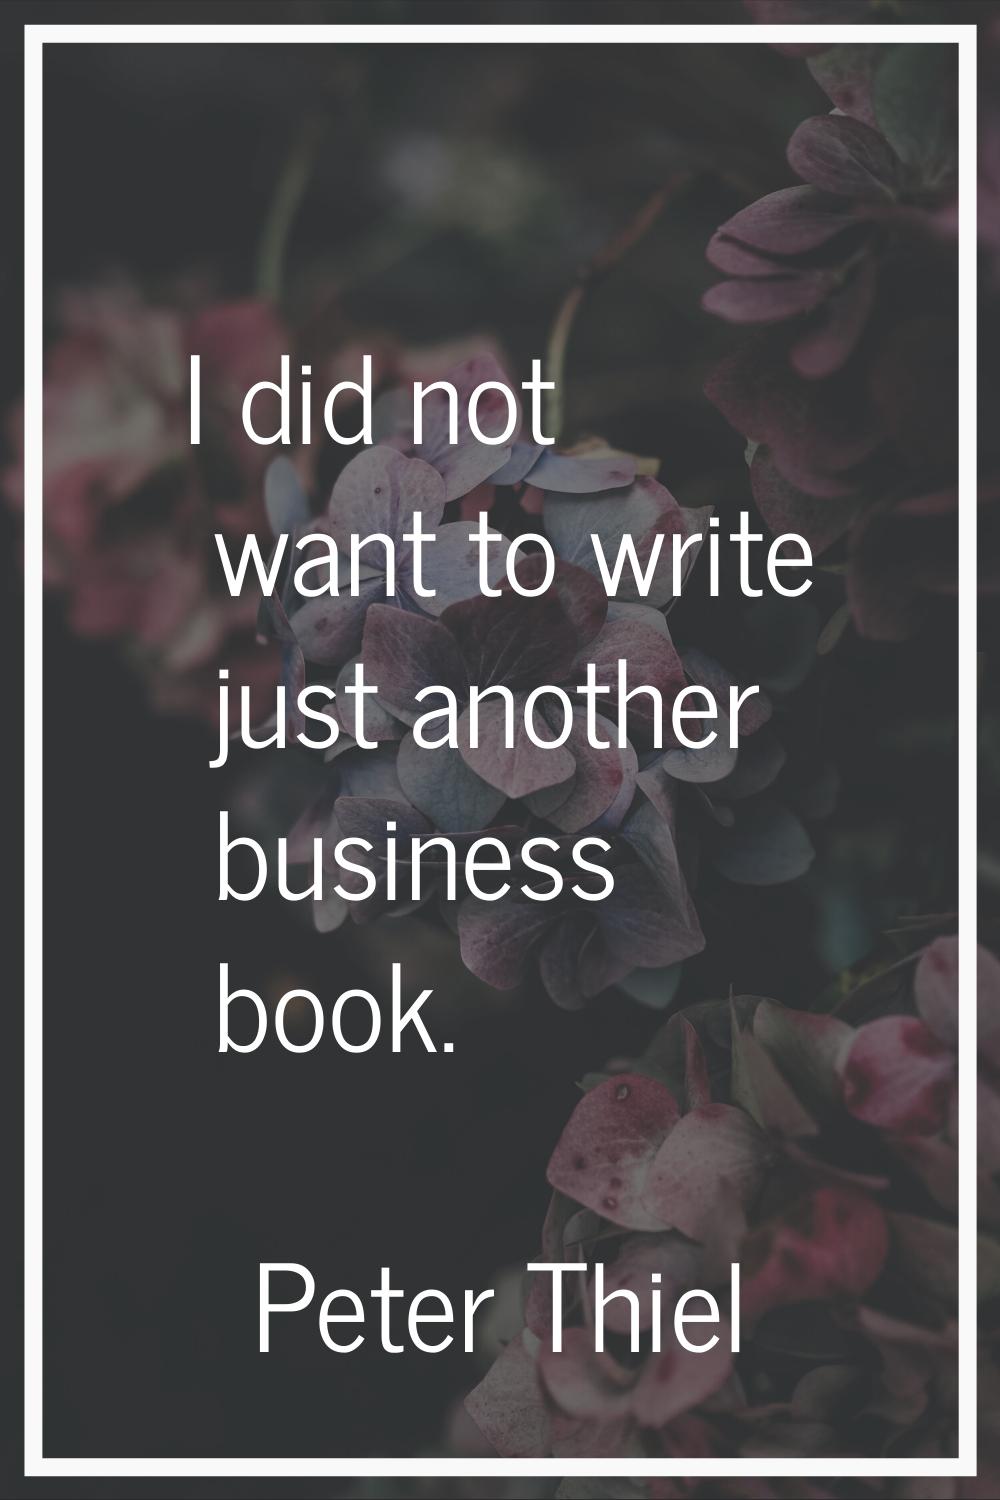 I did not want to write just another business book.